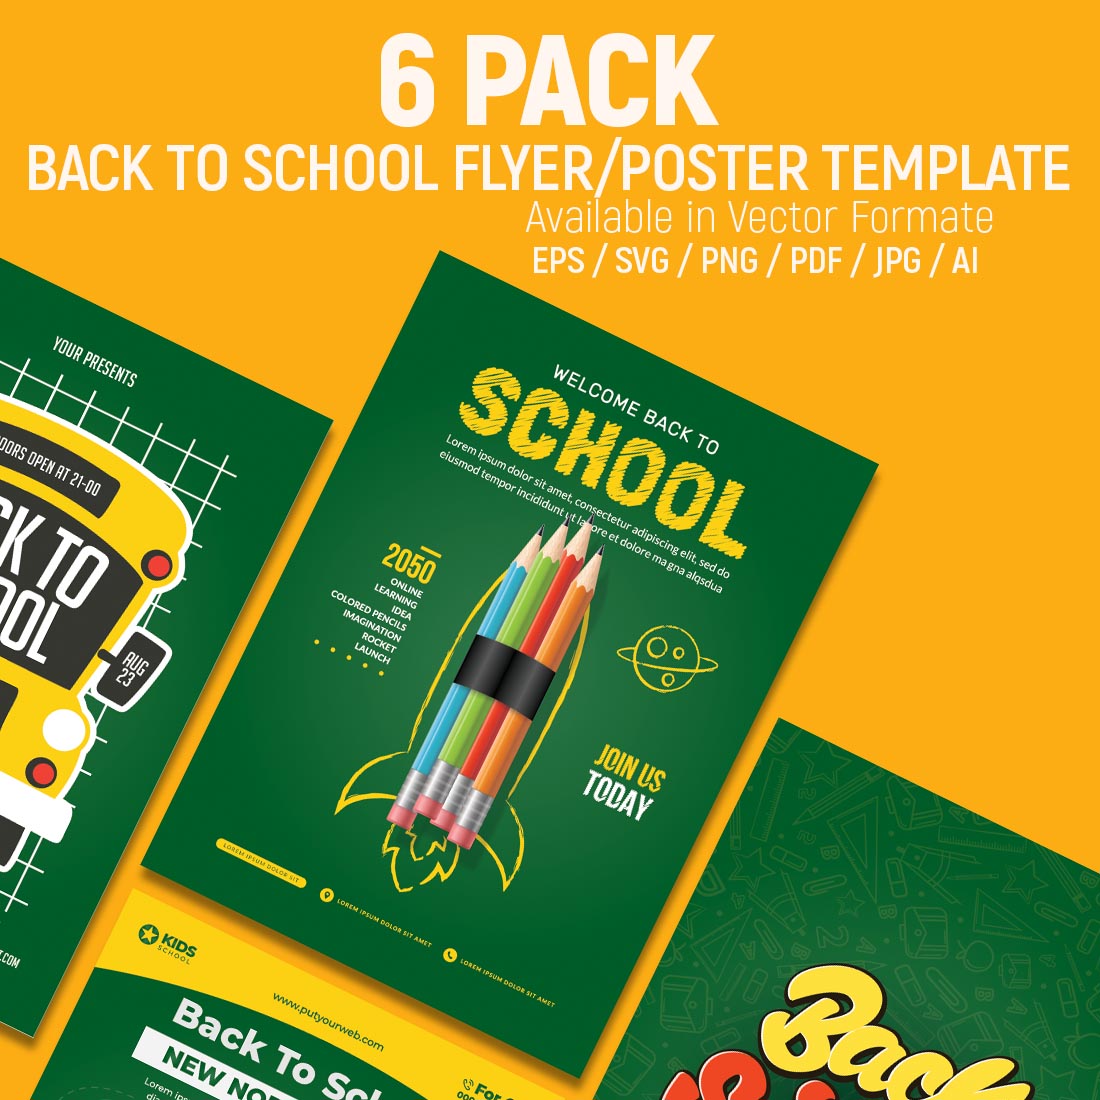 Back to School Flyer-Poster Template cover image.